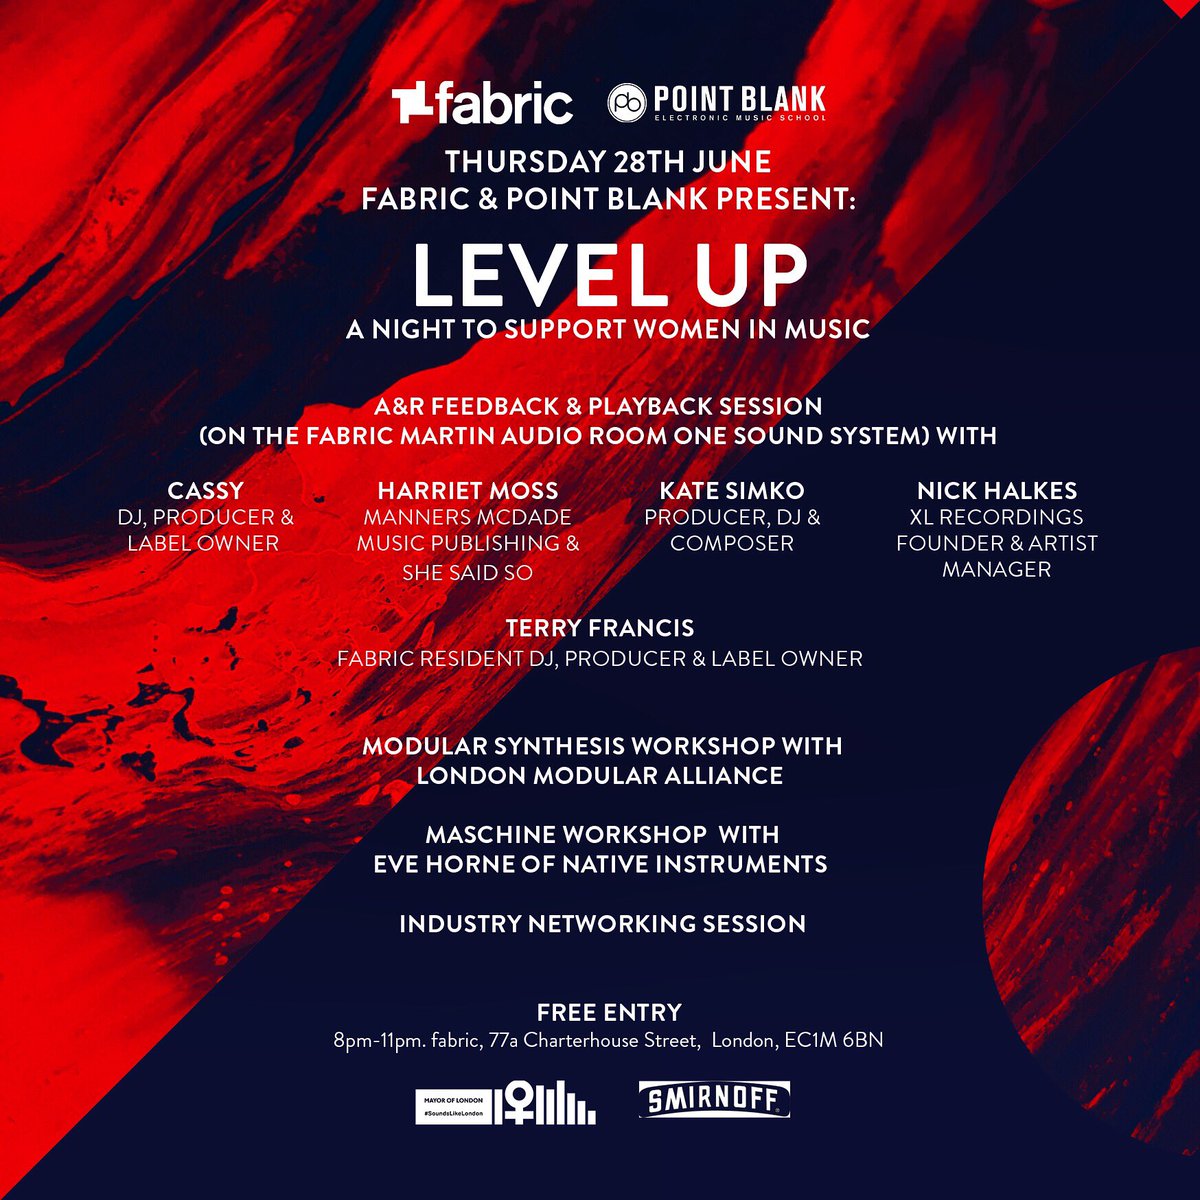 If you‘re a budding female producer, DJ, or just interested in getting into the music industry, come to @fabriclondonofficial this eve between 8-11pm where I’ll be sharing my story and giving advice alongside industry experts! @pointblankmusicschool #levelup #soundslikelondon